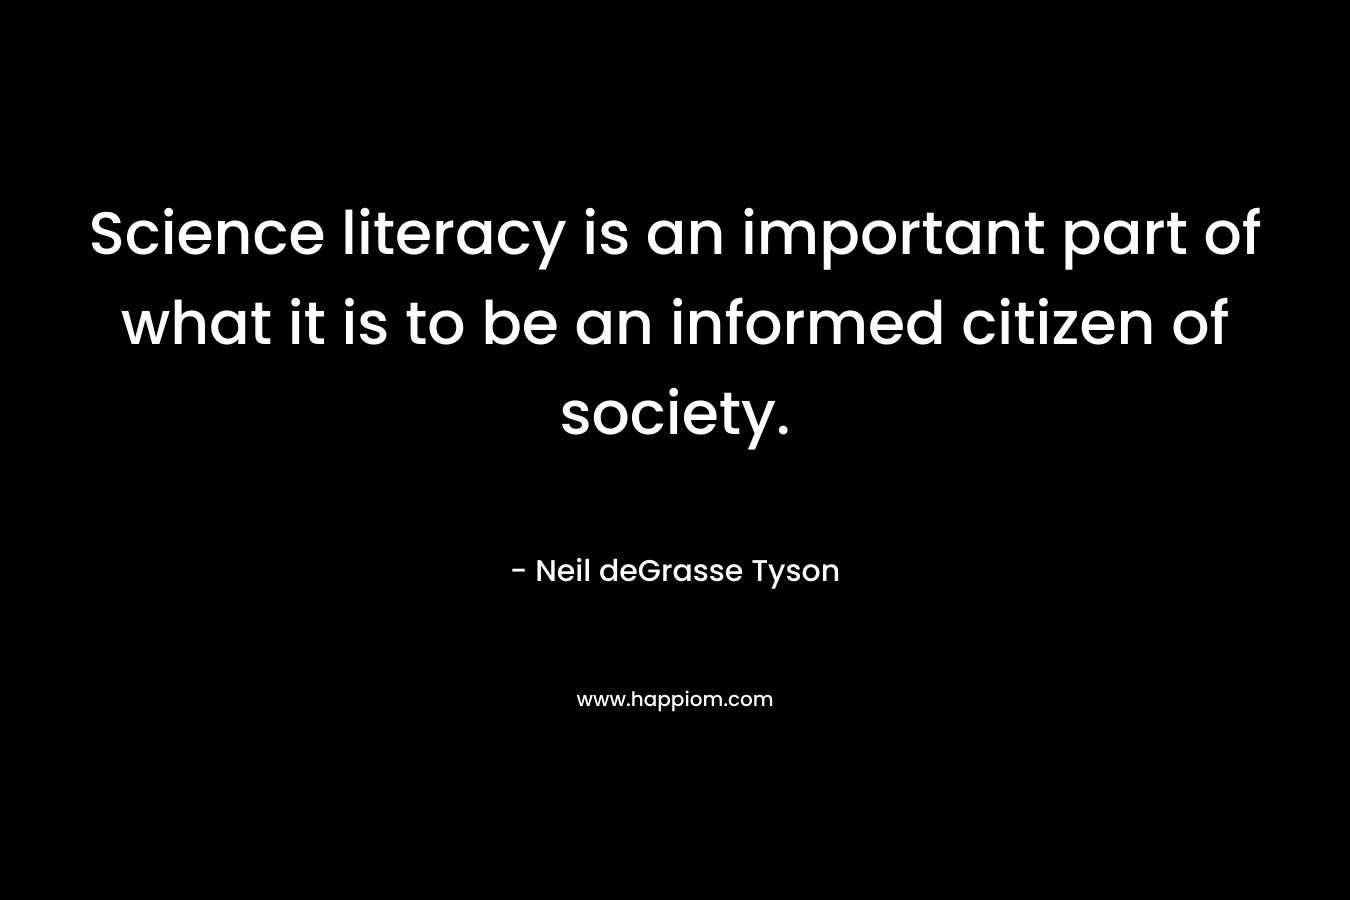 Science literacy is an important part of what it is to be an informed citizen of society. – Neil deGrasse Tyson